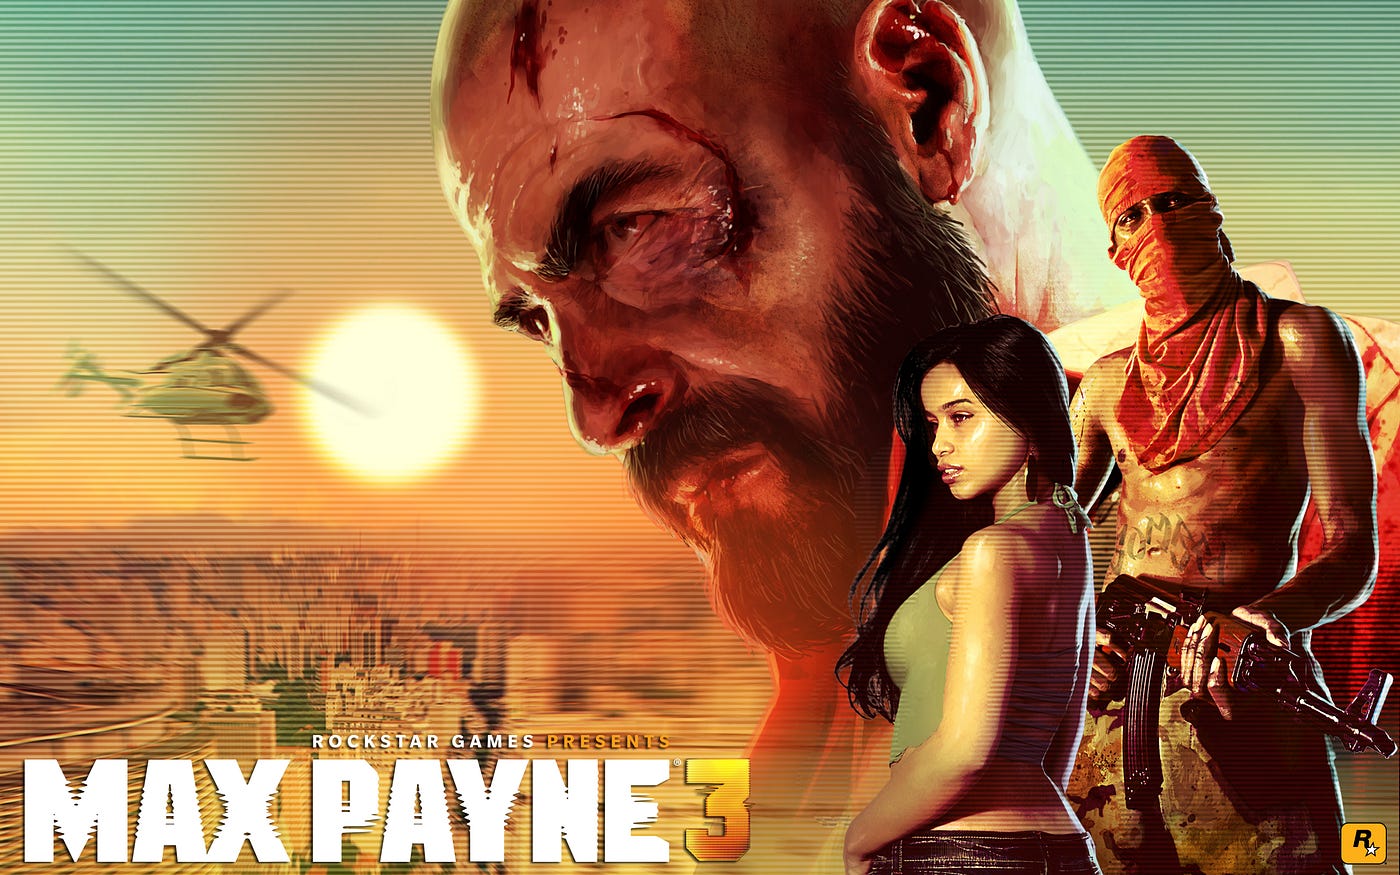 Max Payne 3 (PC). The path to playing Max Payne 3, by Jay (Vijayasimha BR), The Sanguine Tech Trainer